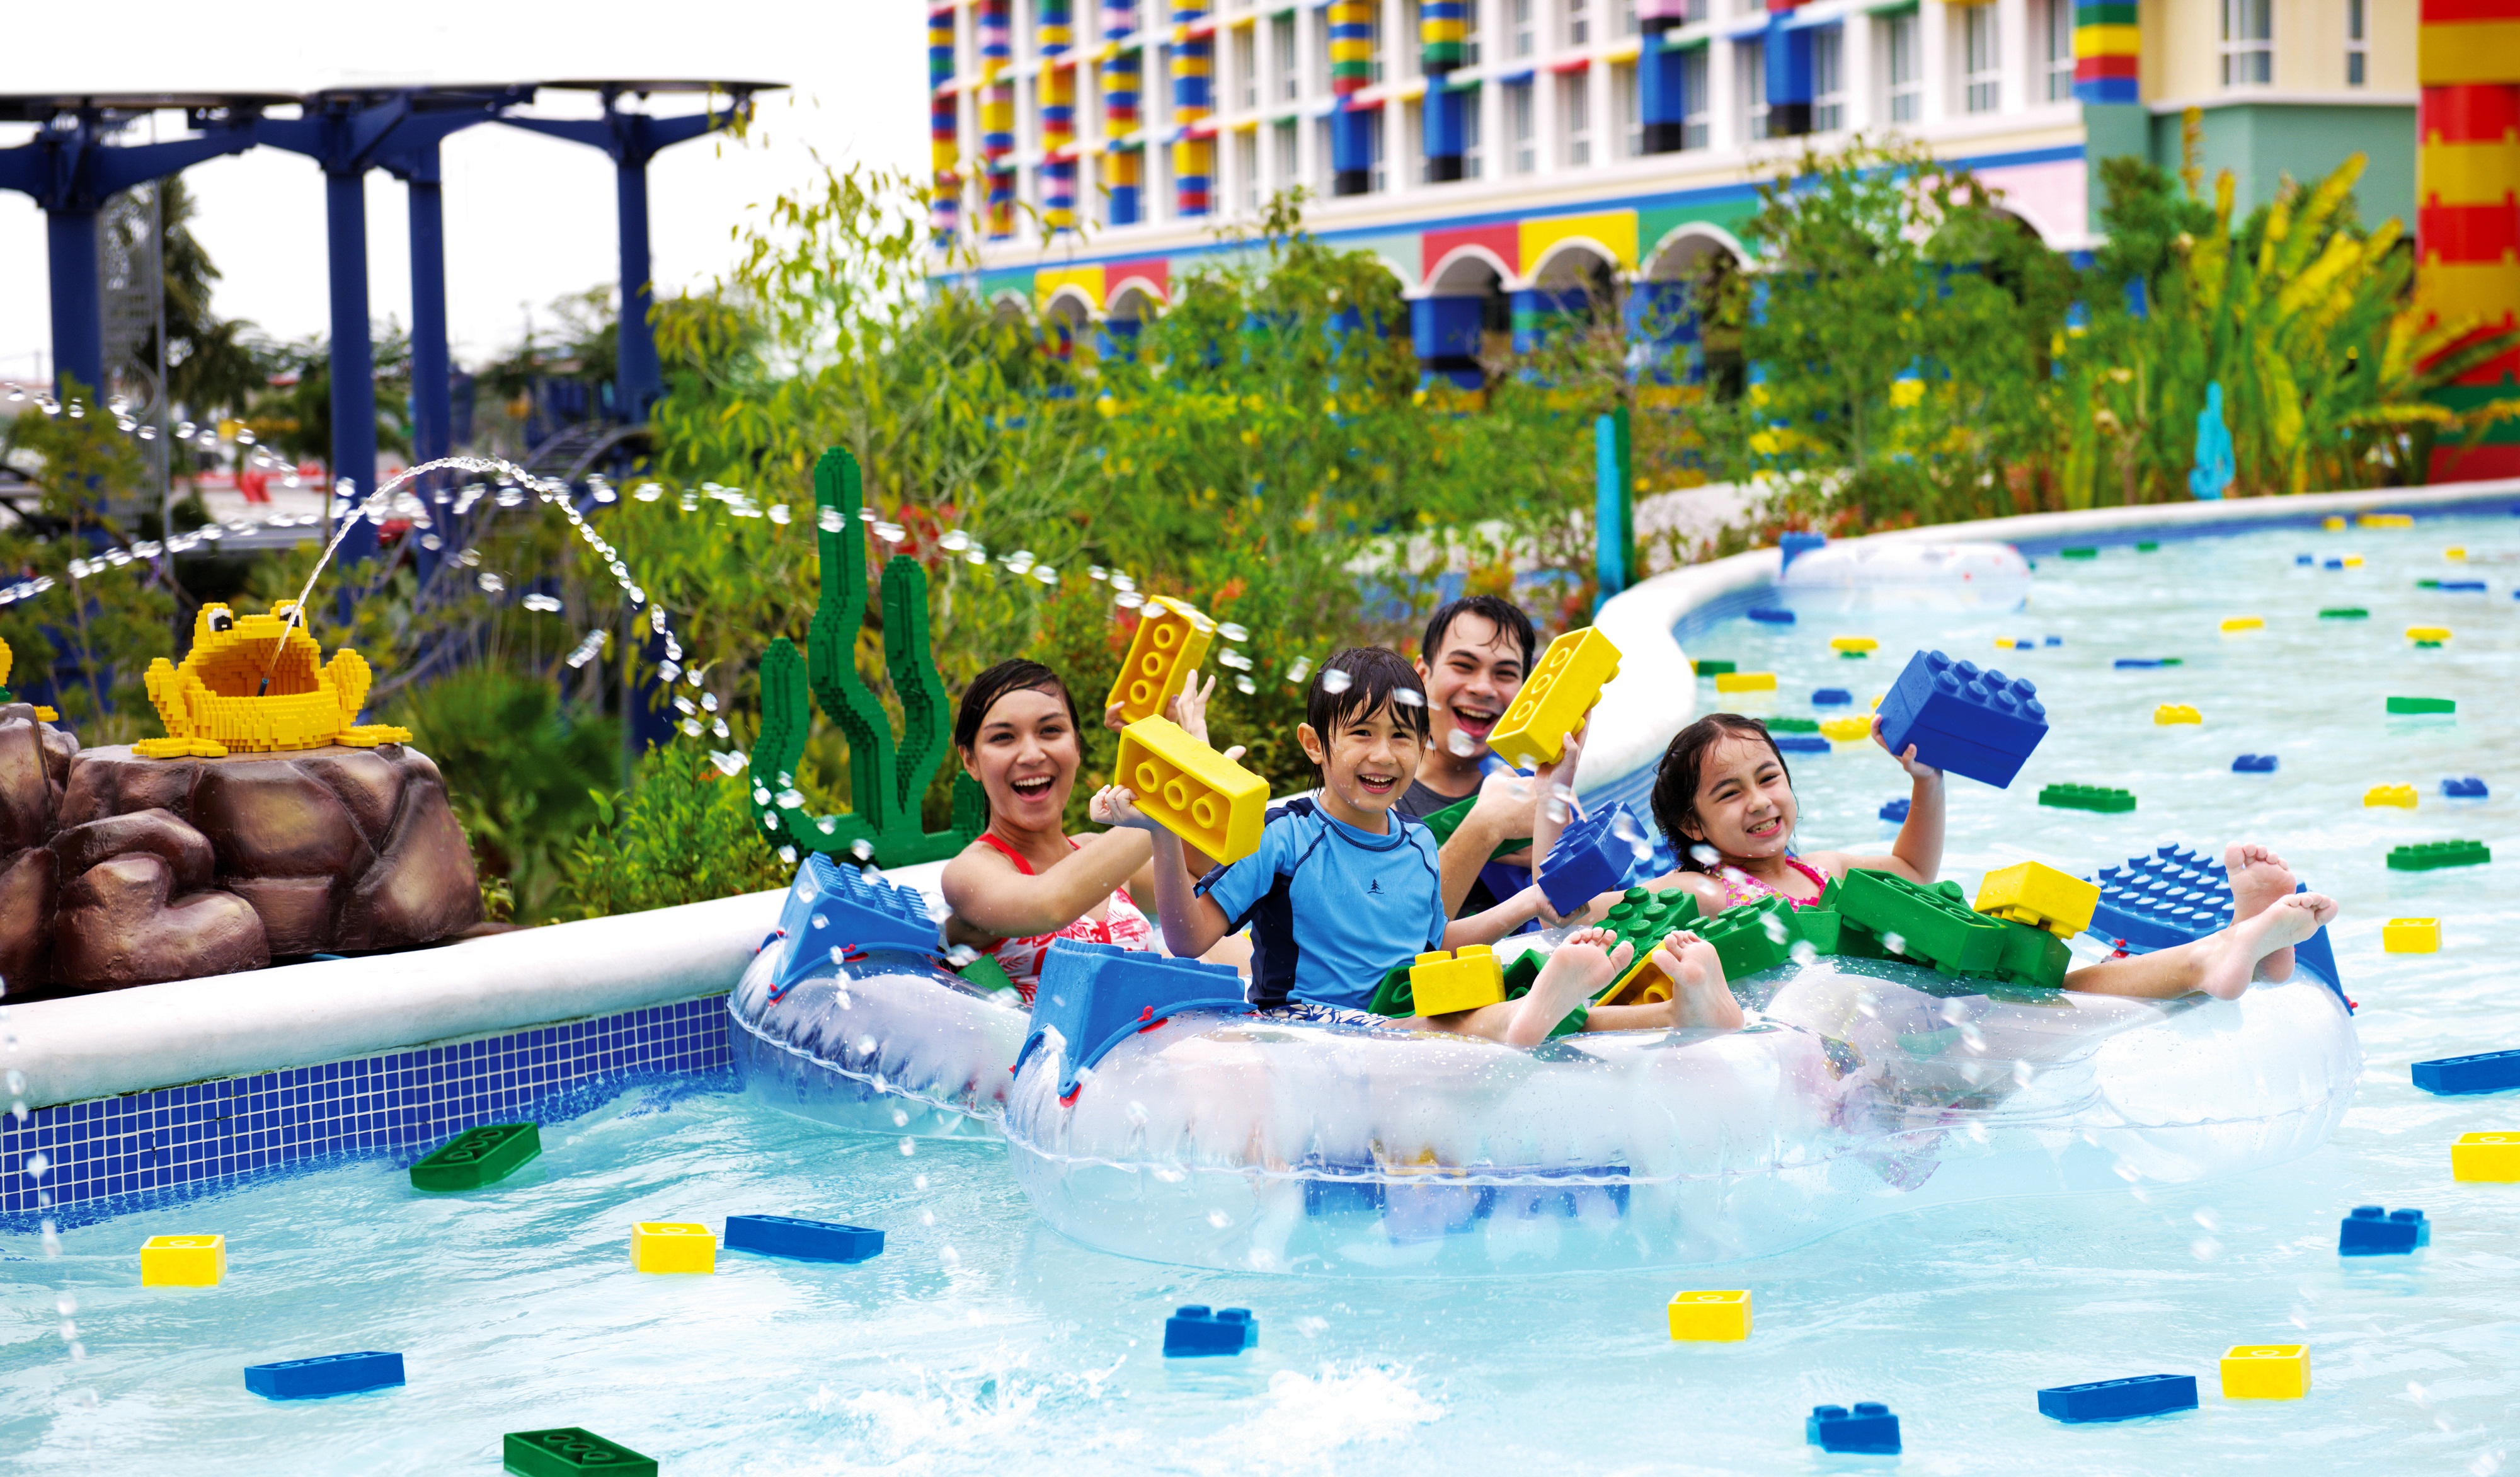 Take A Look At The World's Largest Legoland Water Park ...